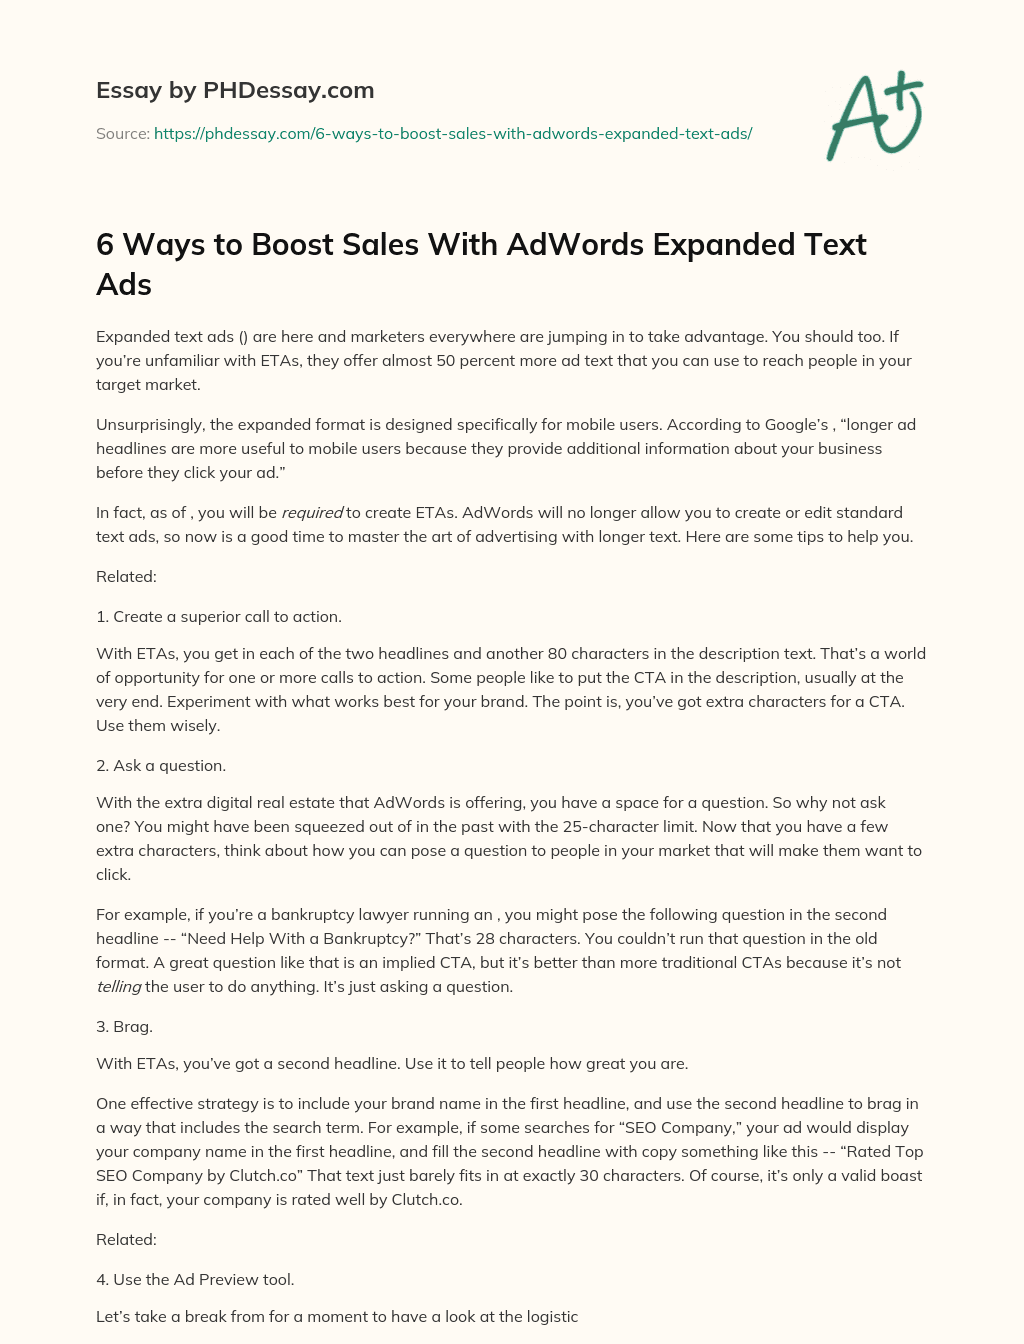 6 Ways to Boost Sales With AdWords Expanded Text Ads essay